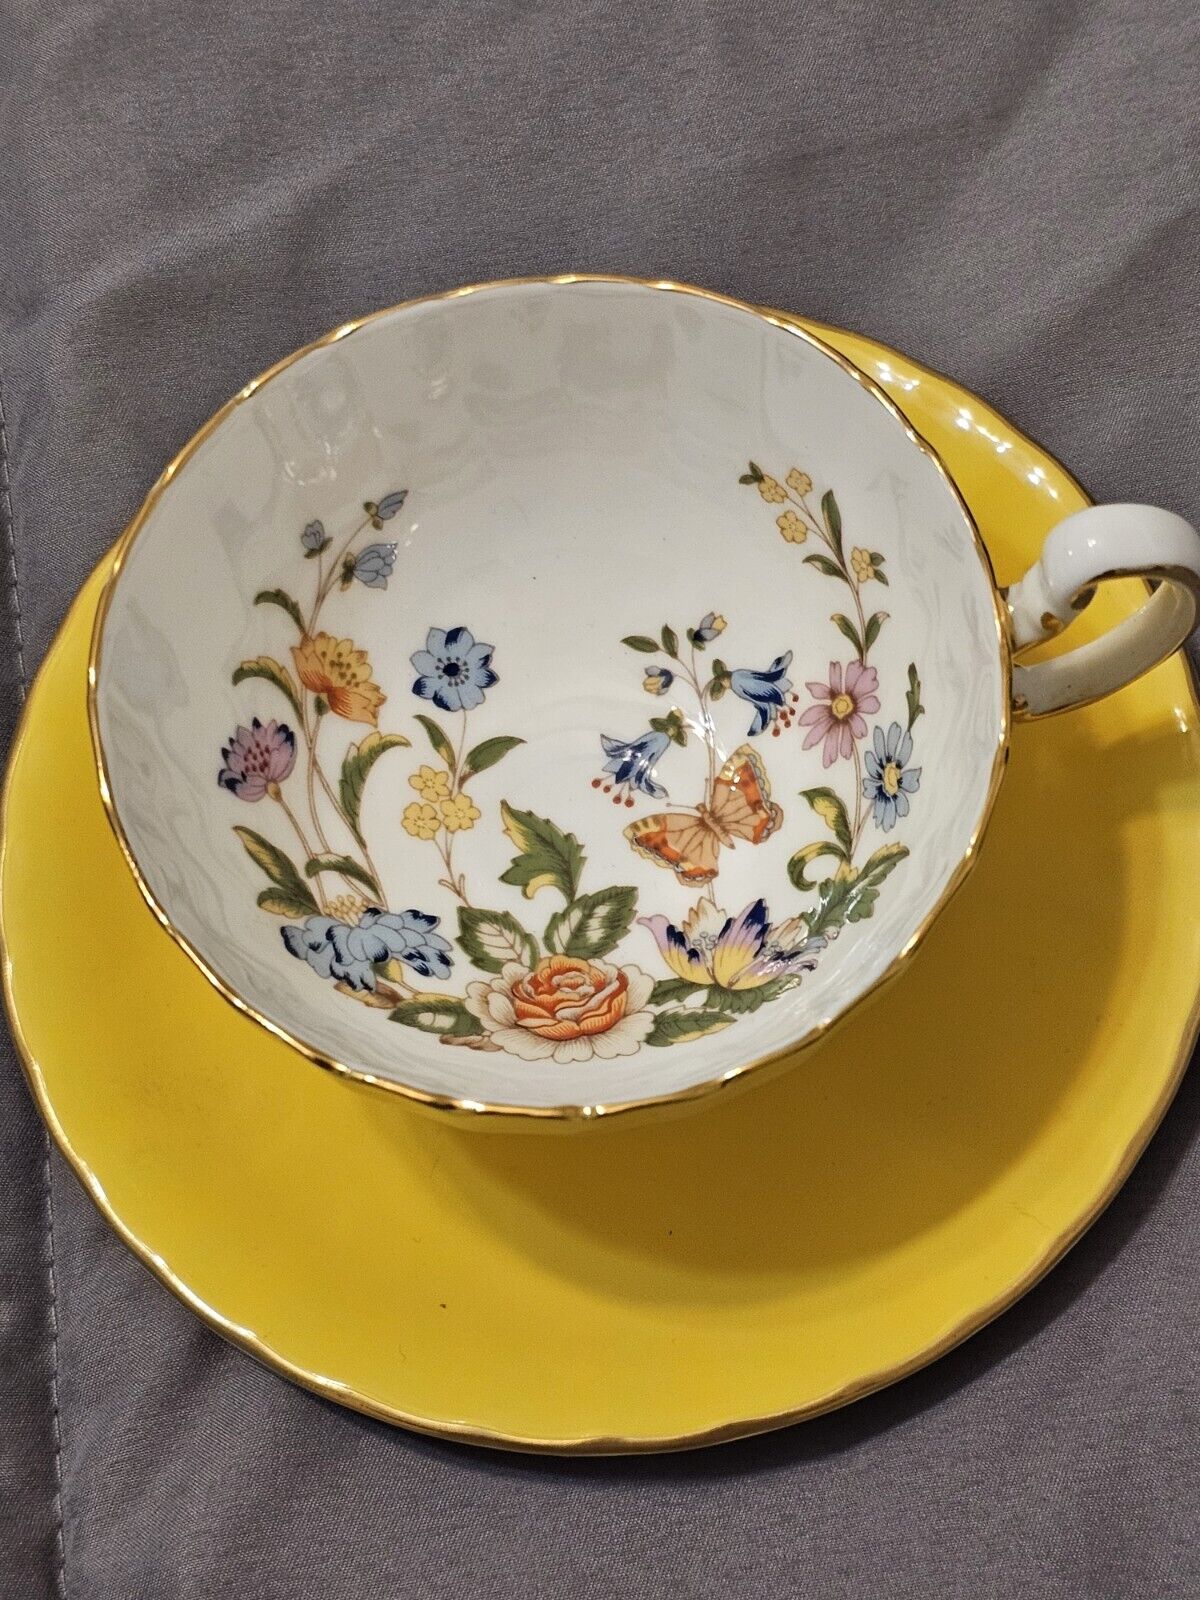 Vtg Aynsely Tea Cup & Saucer Bright Yellow-Cottage Harden Bone China - England 